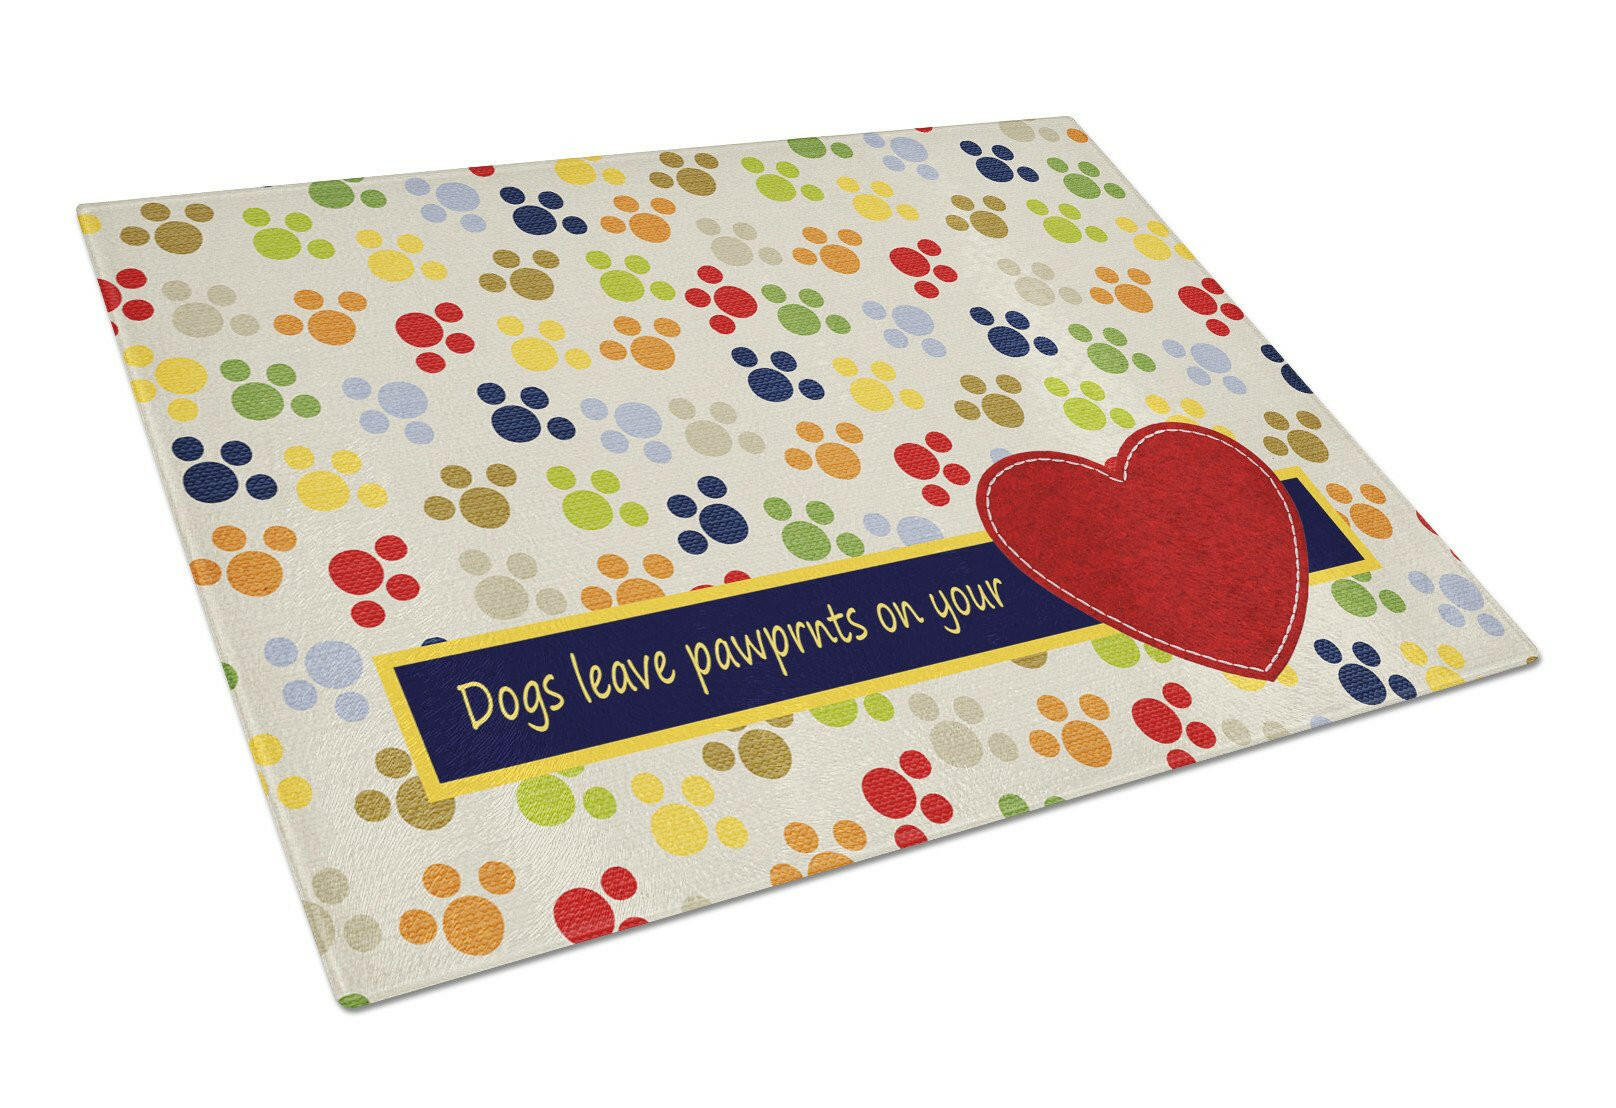 Dogs leave pawprints on your heart Glass Cutting Board Large Size SB3054LCB by Caroline's Treasures